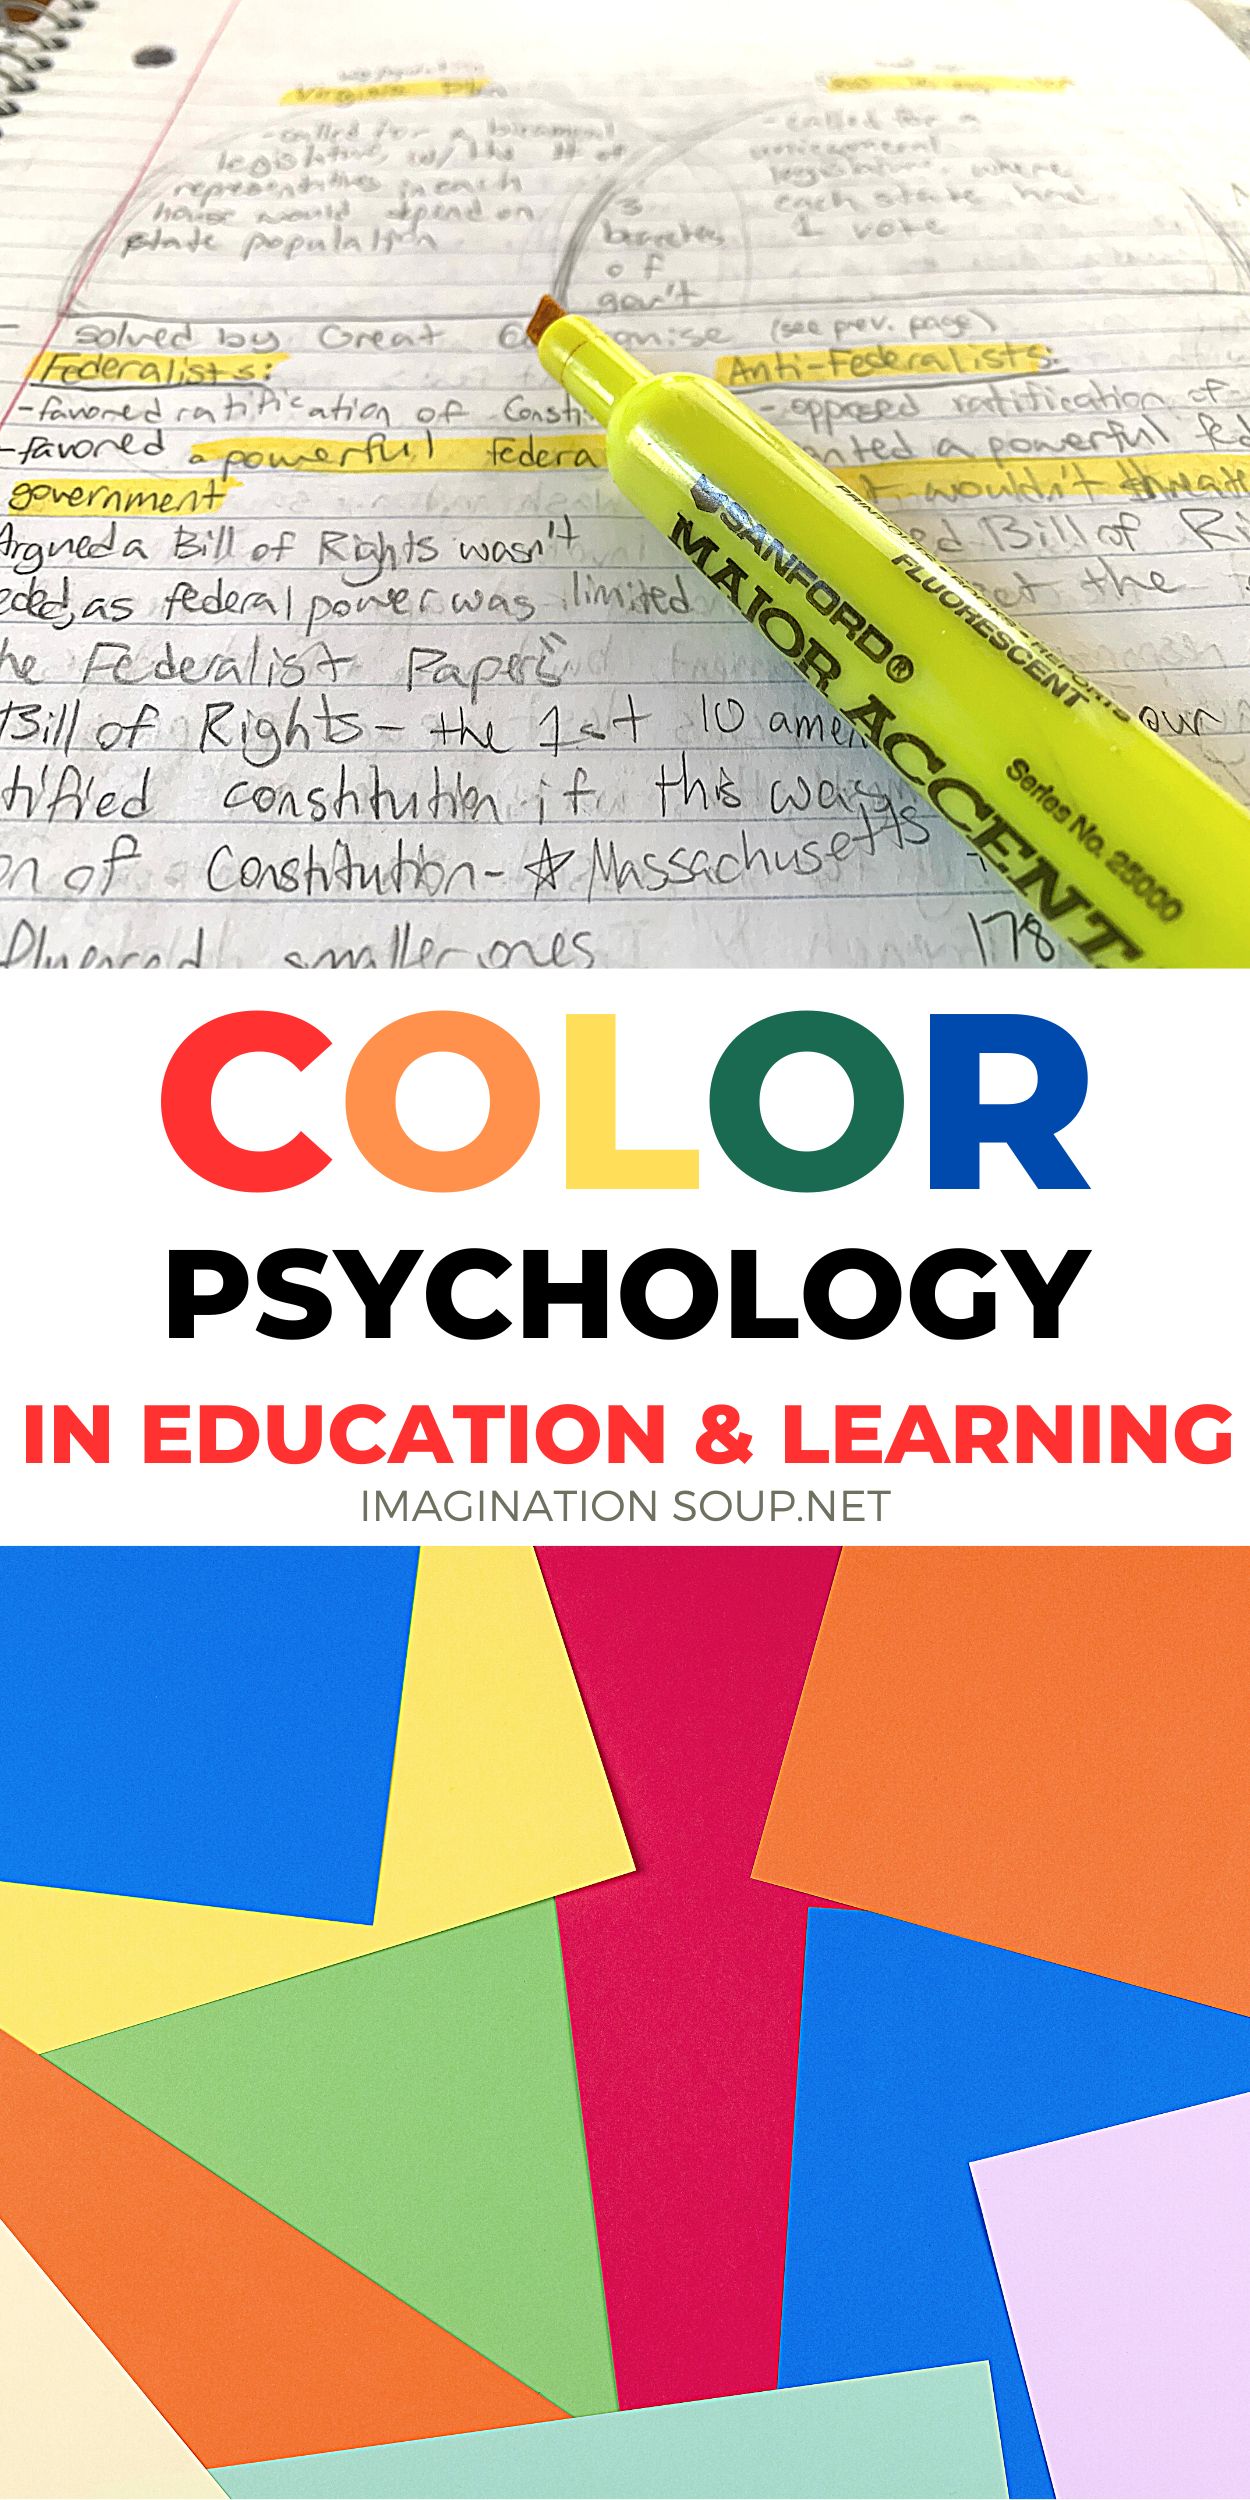 Marketing departments spend millions of dollars on color psychology. Why? Because people see color before anything else. But if you're a teacher, you probably want to know the best way to use color in learning and instruction. I assure you, as a teacher who uses color psychology everday, it's one of the most important tools you can use in the classroom.